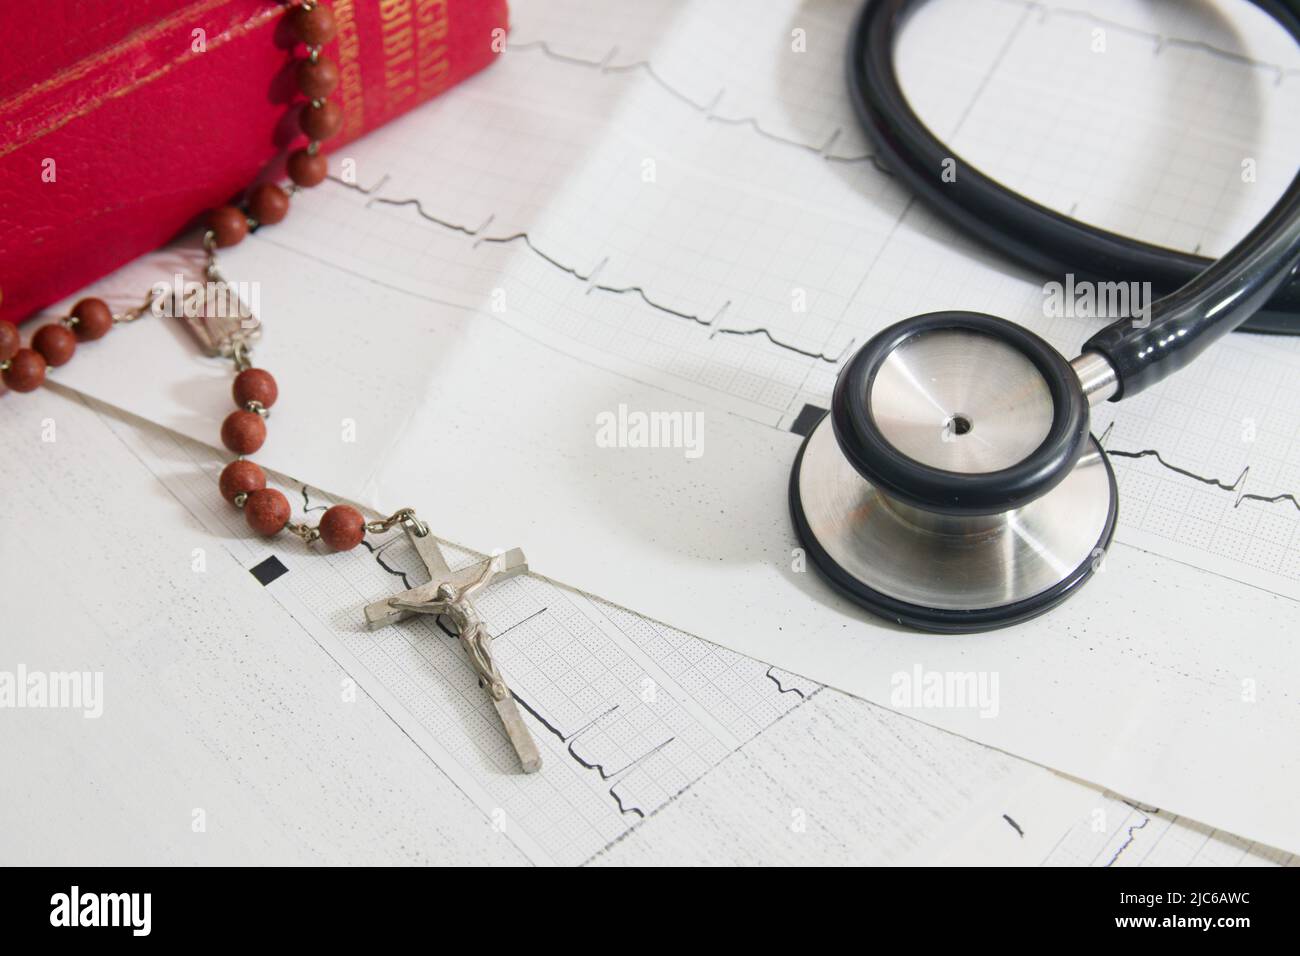 Close-up of a crucifix and a stethoscope on a patient's printed cardiograms next to a bible Stock Photo